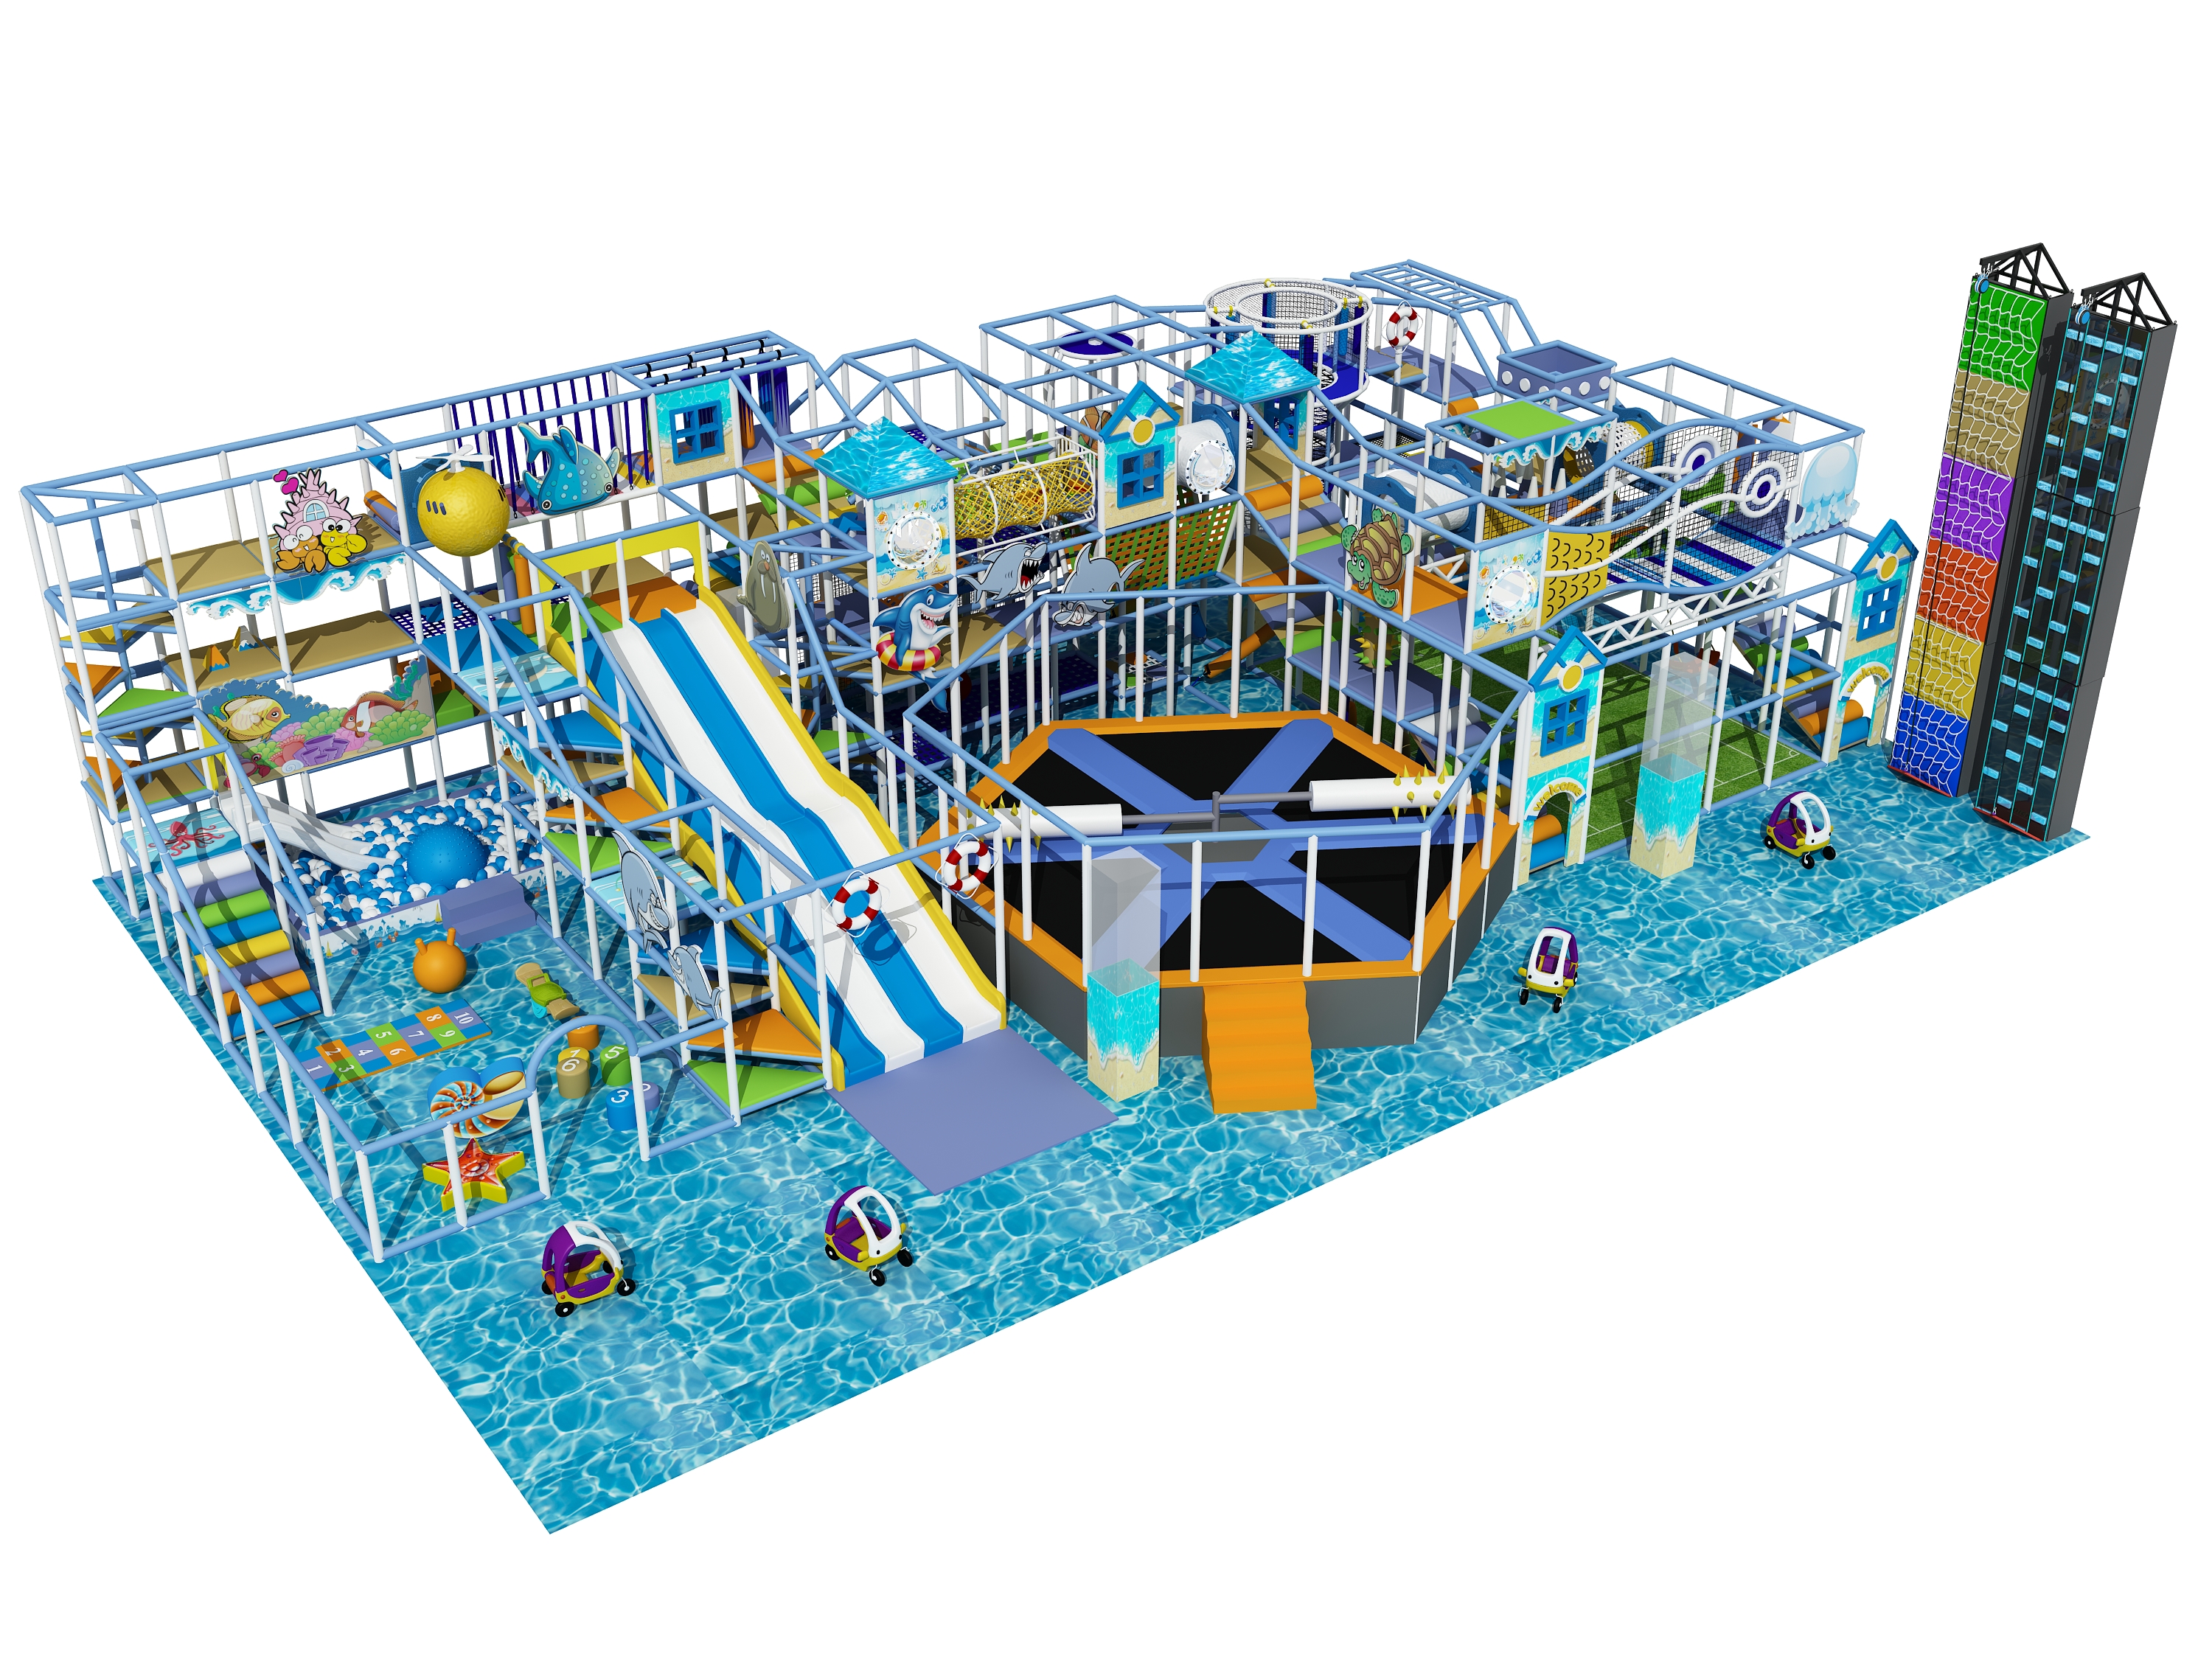 Indoor Playground for kids Family Fun